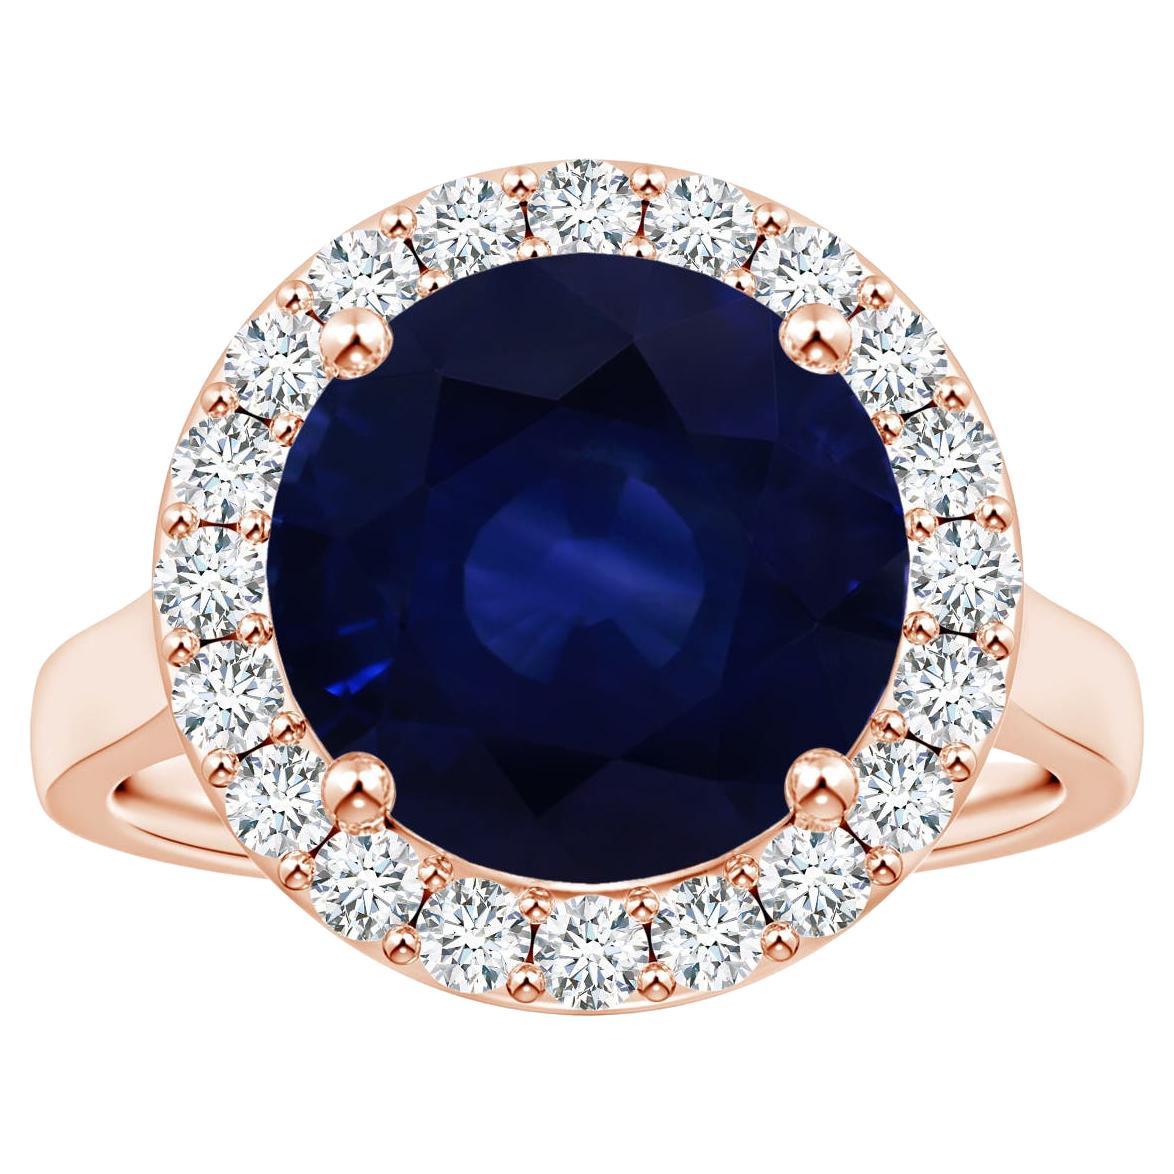 ANGARA GIA Certified Natural 6.63ct Blue Sapphire Ring with Diamond in Rose Gold